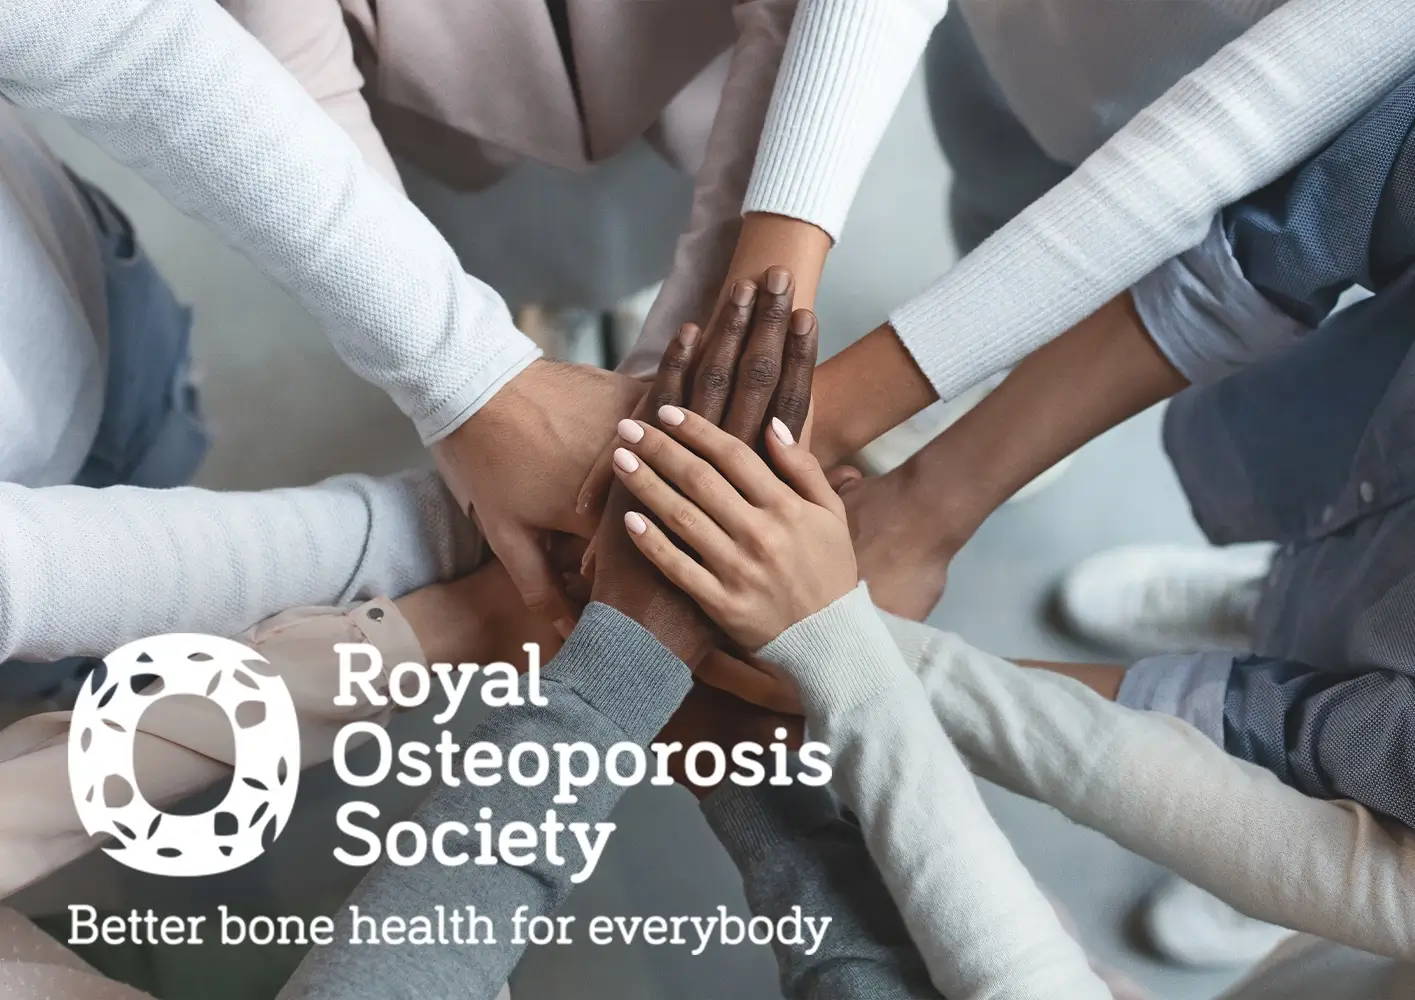 What is the Royal Osteoporosis Society & what do you need to know about osteoporosis?